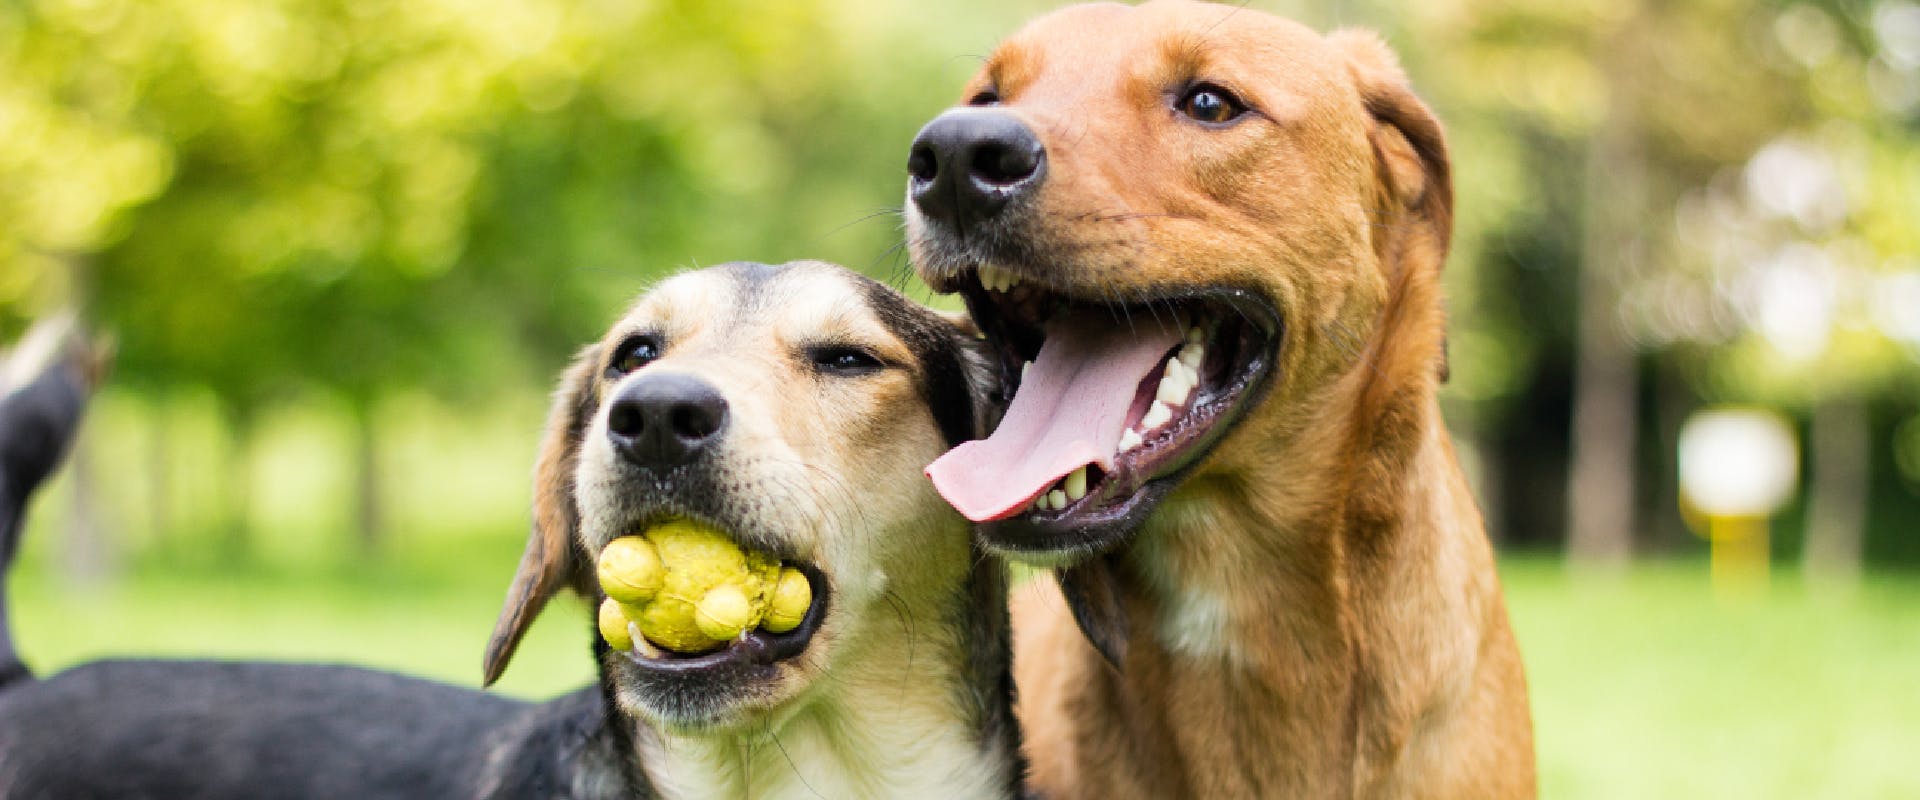 A close up of two happy dogs, one with a ball in its mouth.